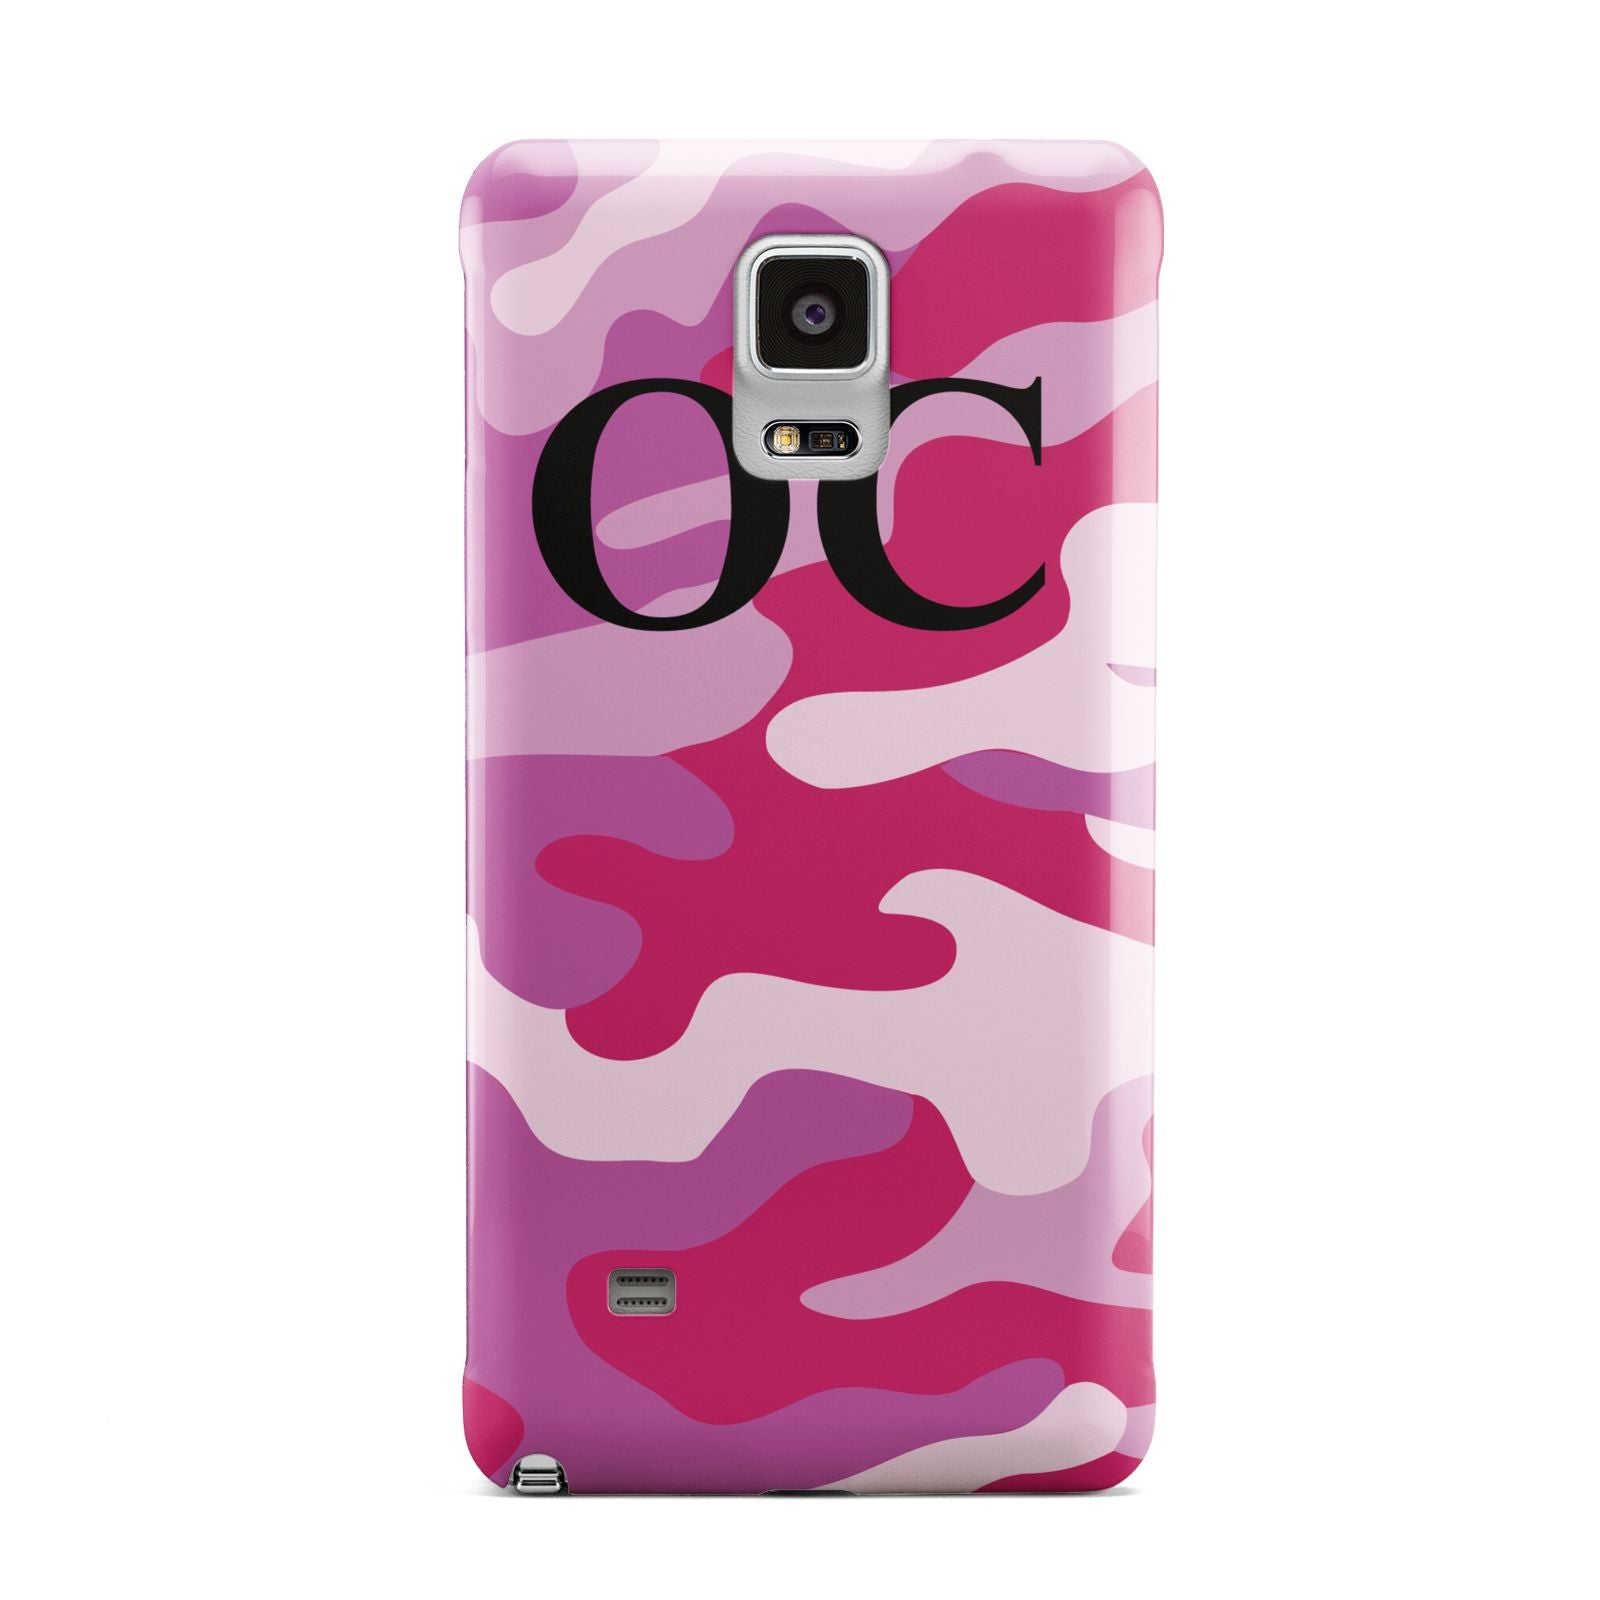 Camouflage Personalised Samsung Galaxy Note 4 Case